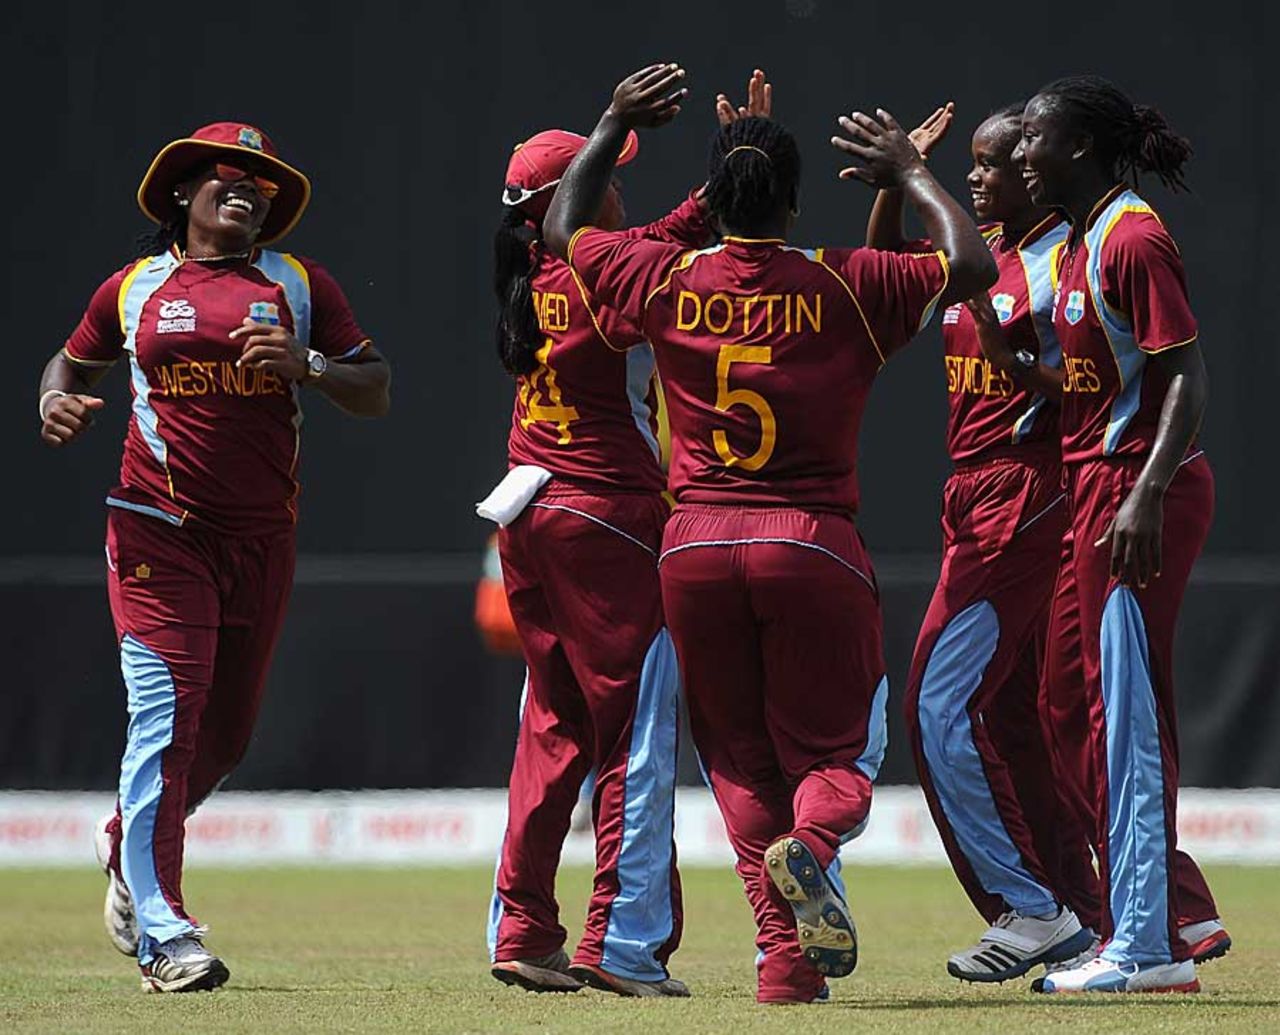 West Indies were ruthless in their win over South Africa, South Africa v West Indies, Group B, Women's World Twenty20, September 30, 2012